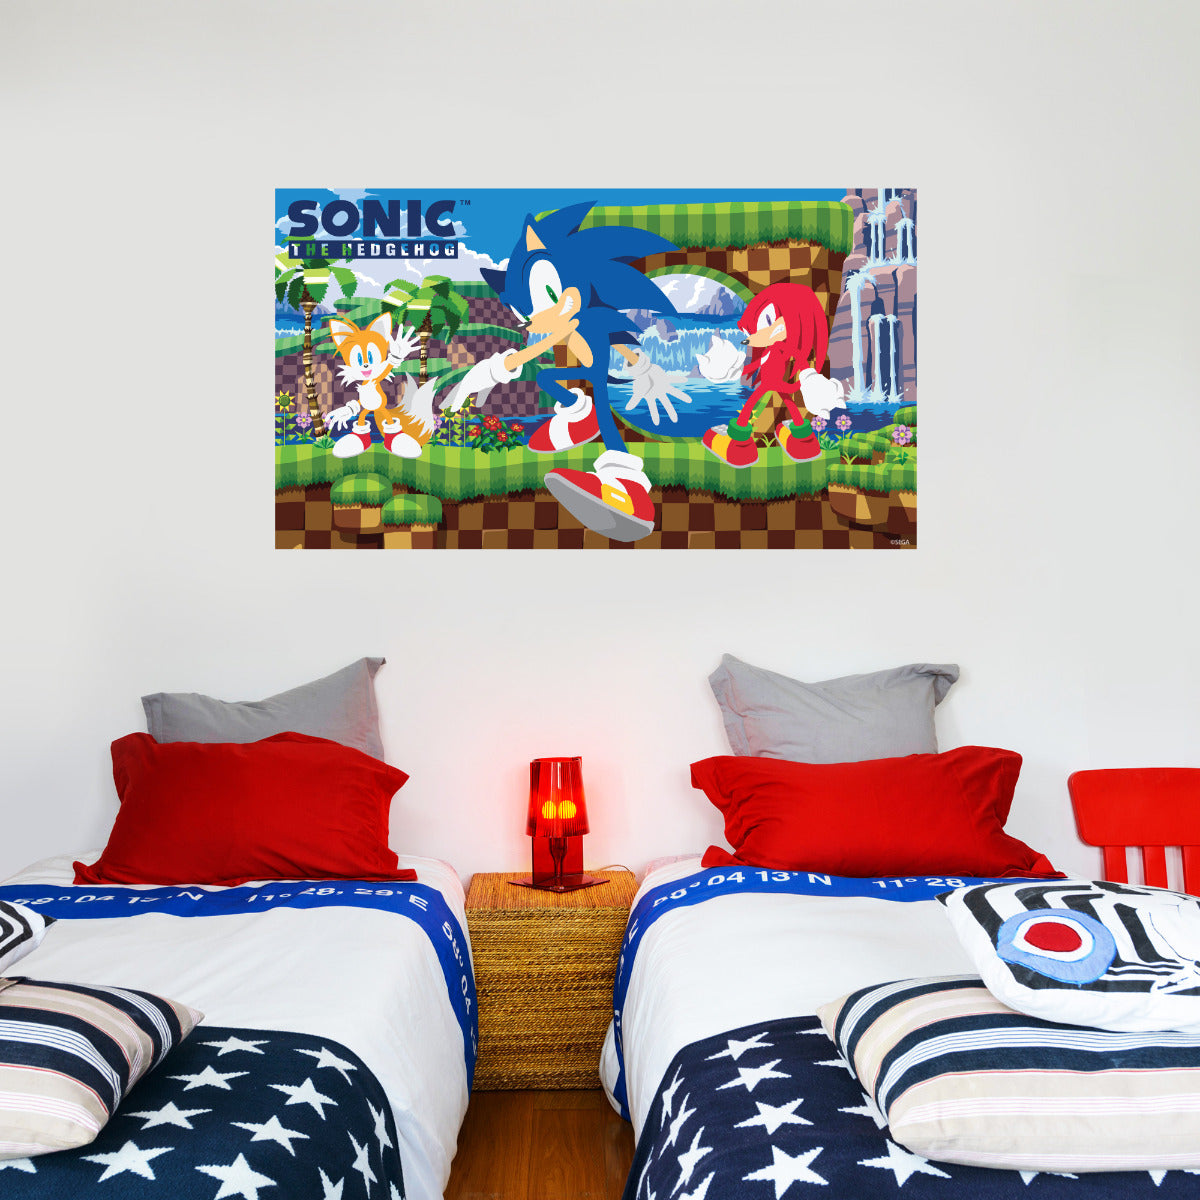 Sonic The Hedgehog Sonic Tails and Knuckles Wall Mural SONIC11